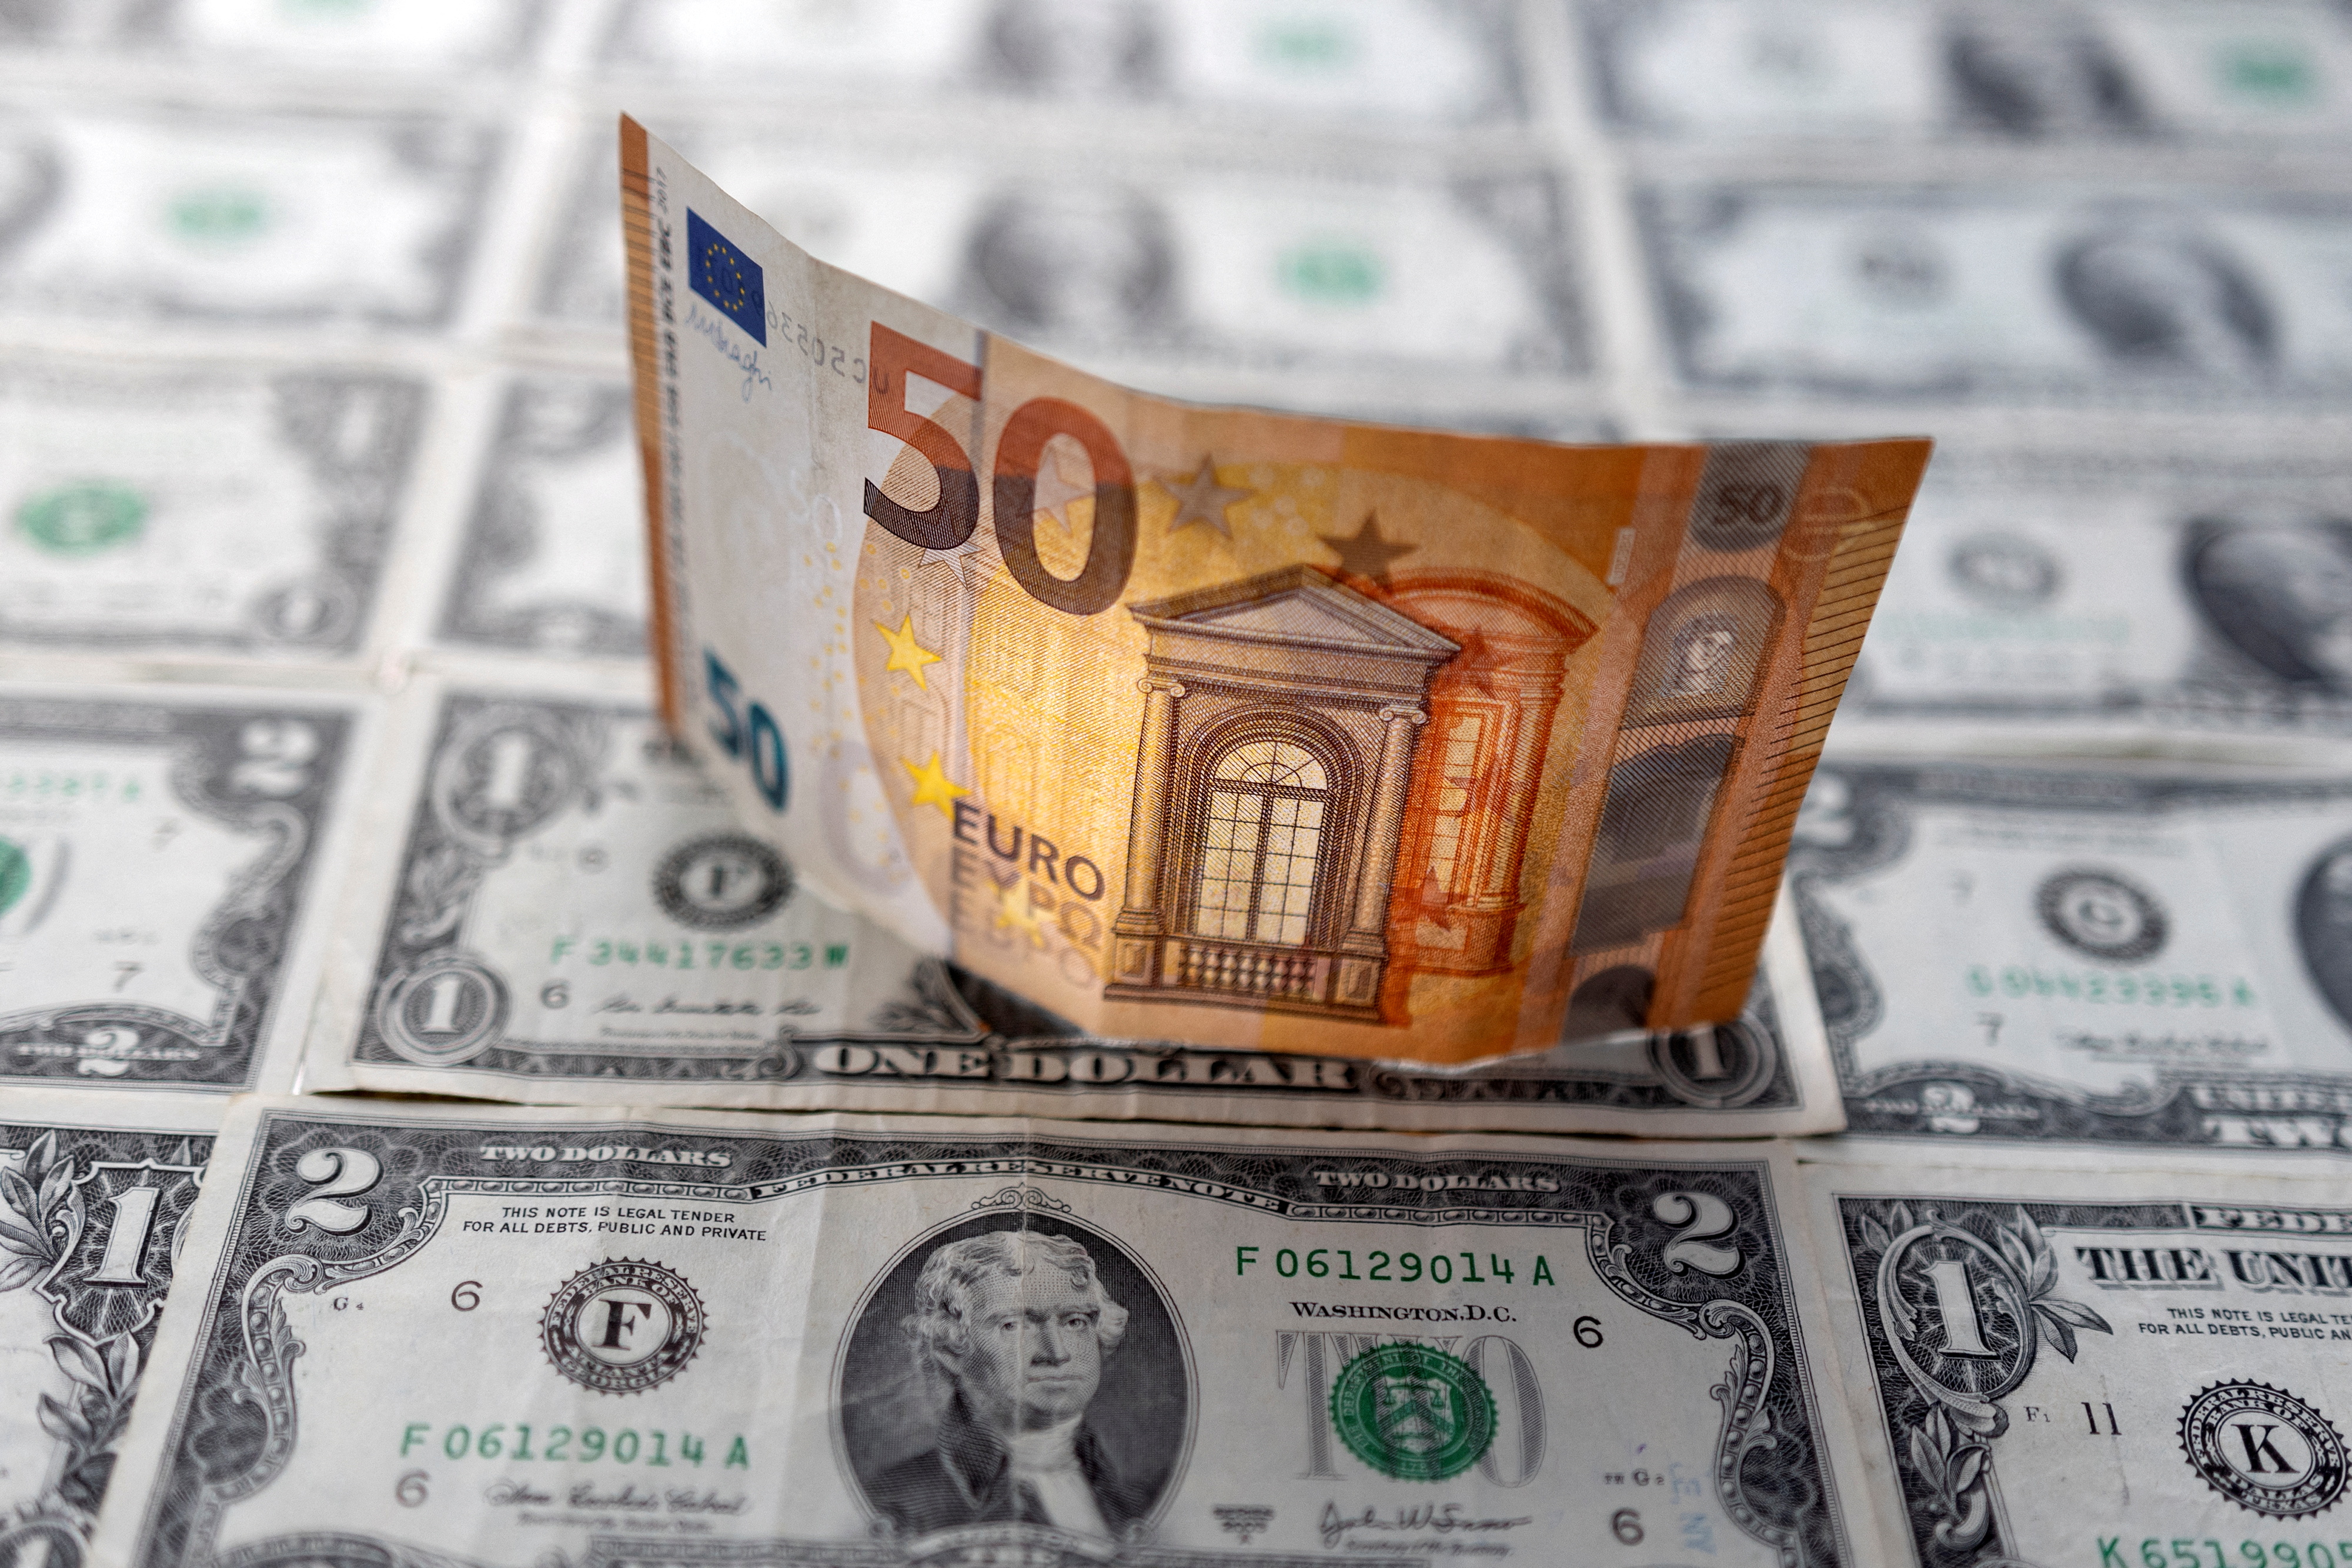 Illustration shows Euro banknote placed on U.S. Dollar banknotes